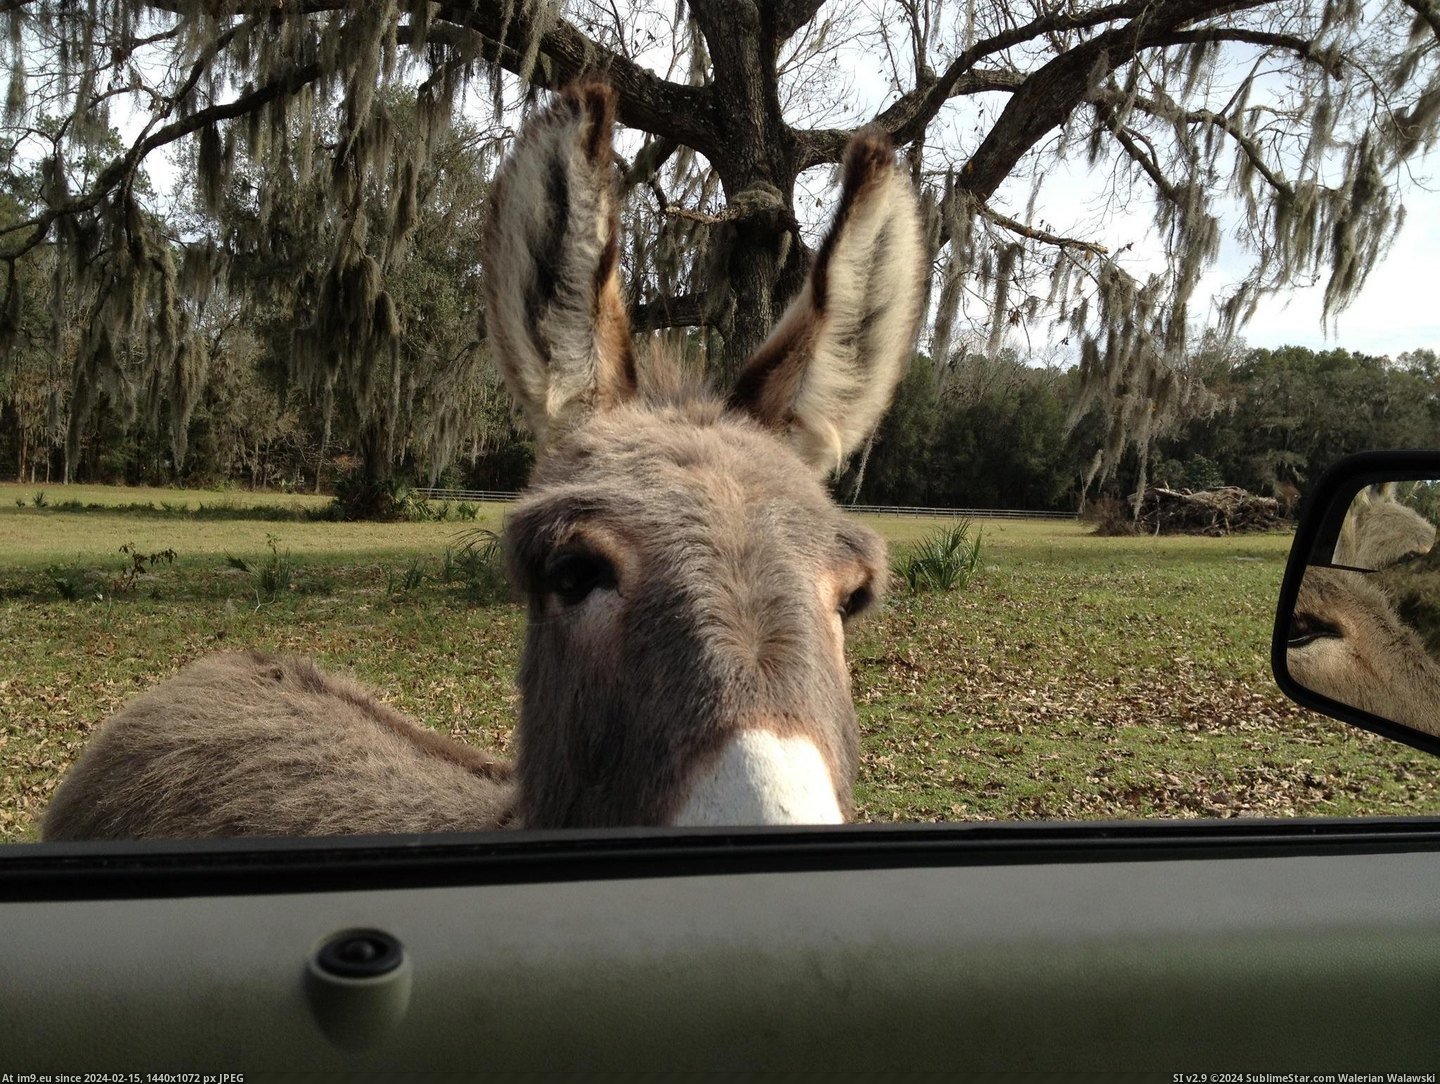 #Funny #Head #Mini #Scratch #Donkey #Neighbor #Chase #Driveway [Funny] My neighbor has a mini donkey that will chase you up the driveway until you scratch his head. 1 Pic. (Изображение из альбом My r/FUNNY favs))